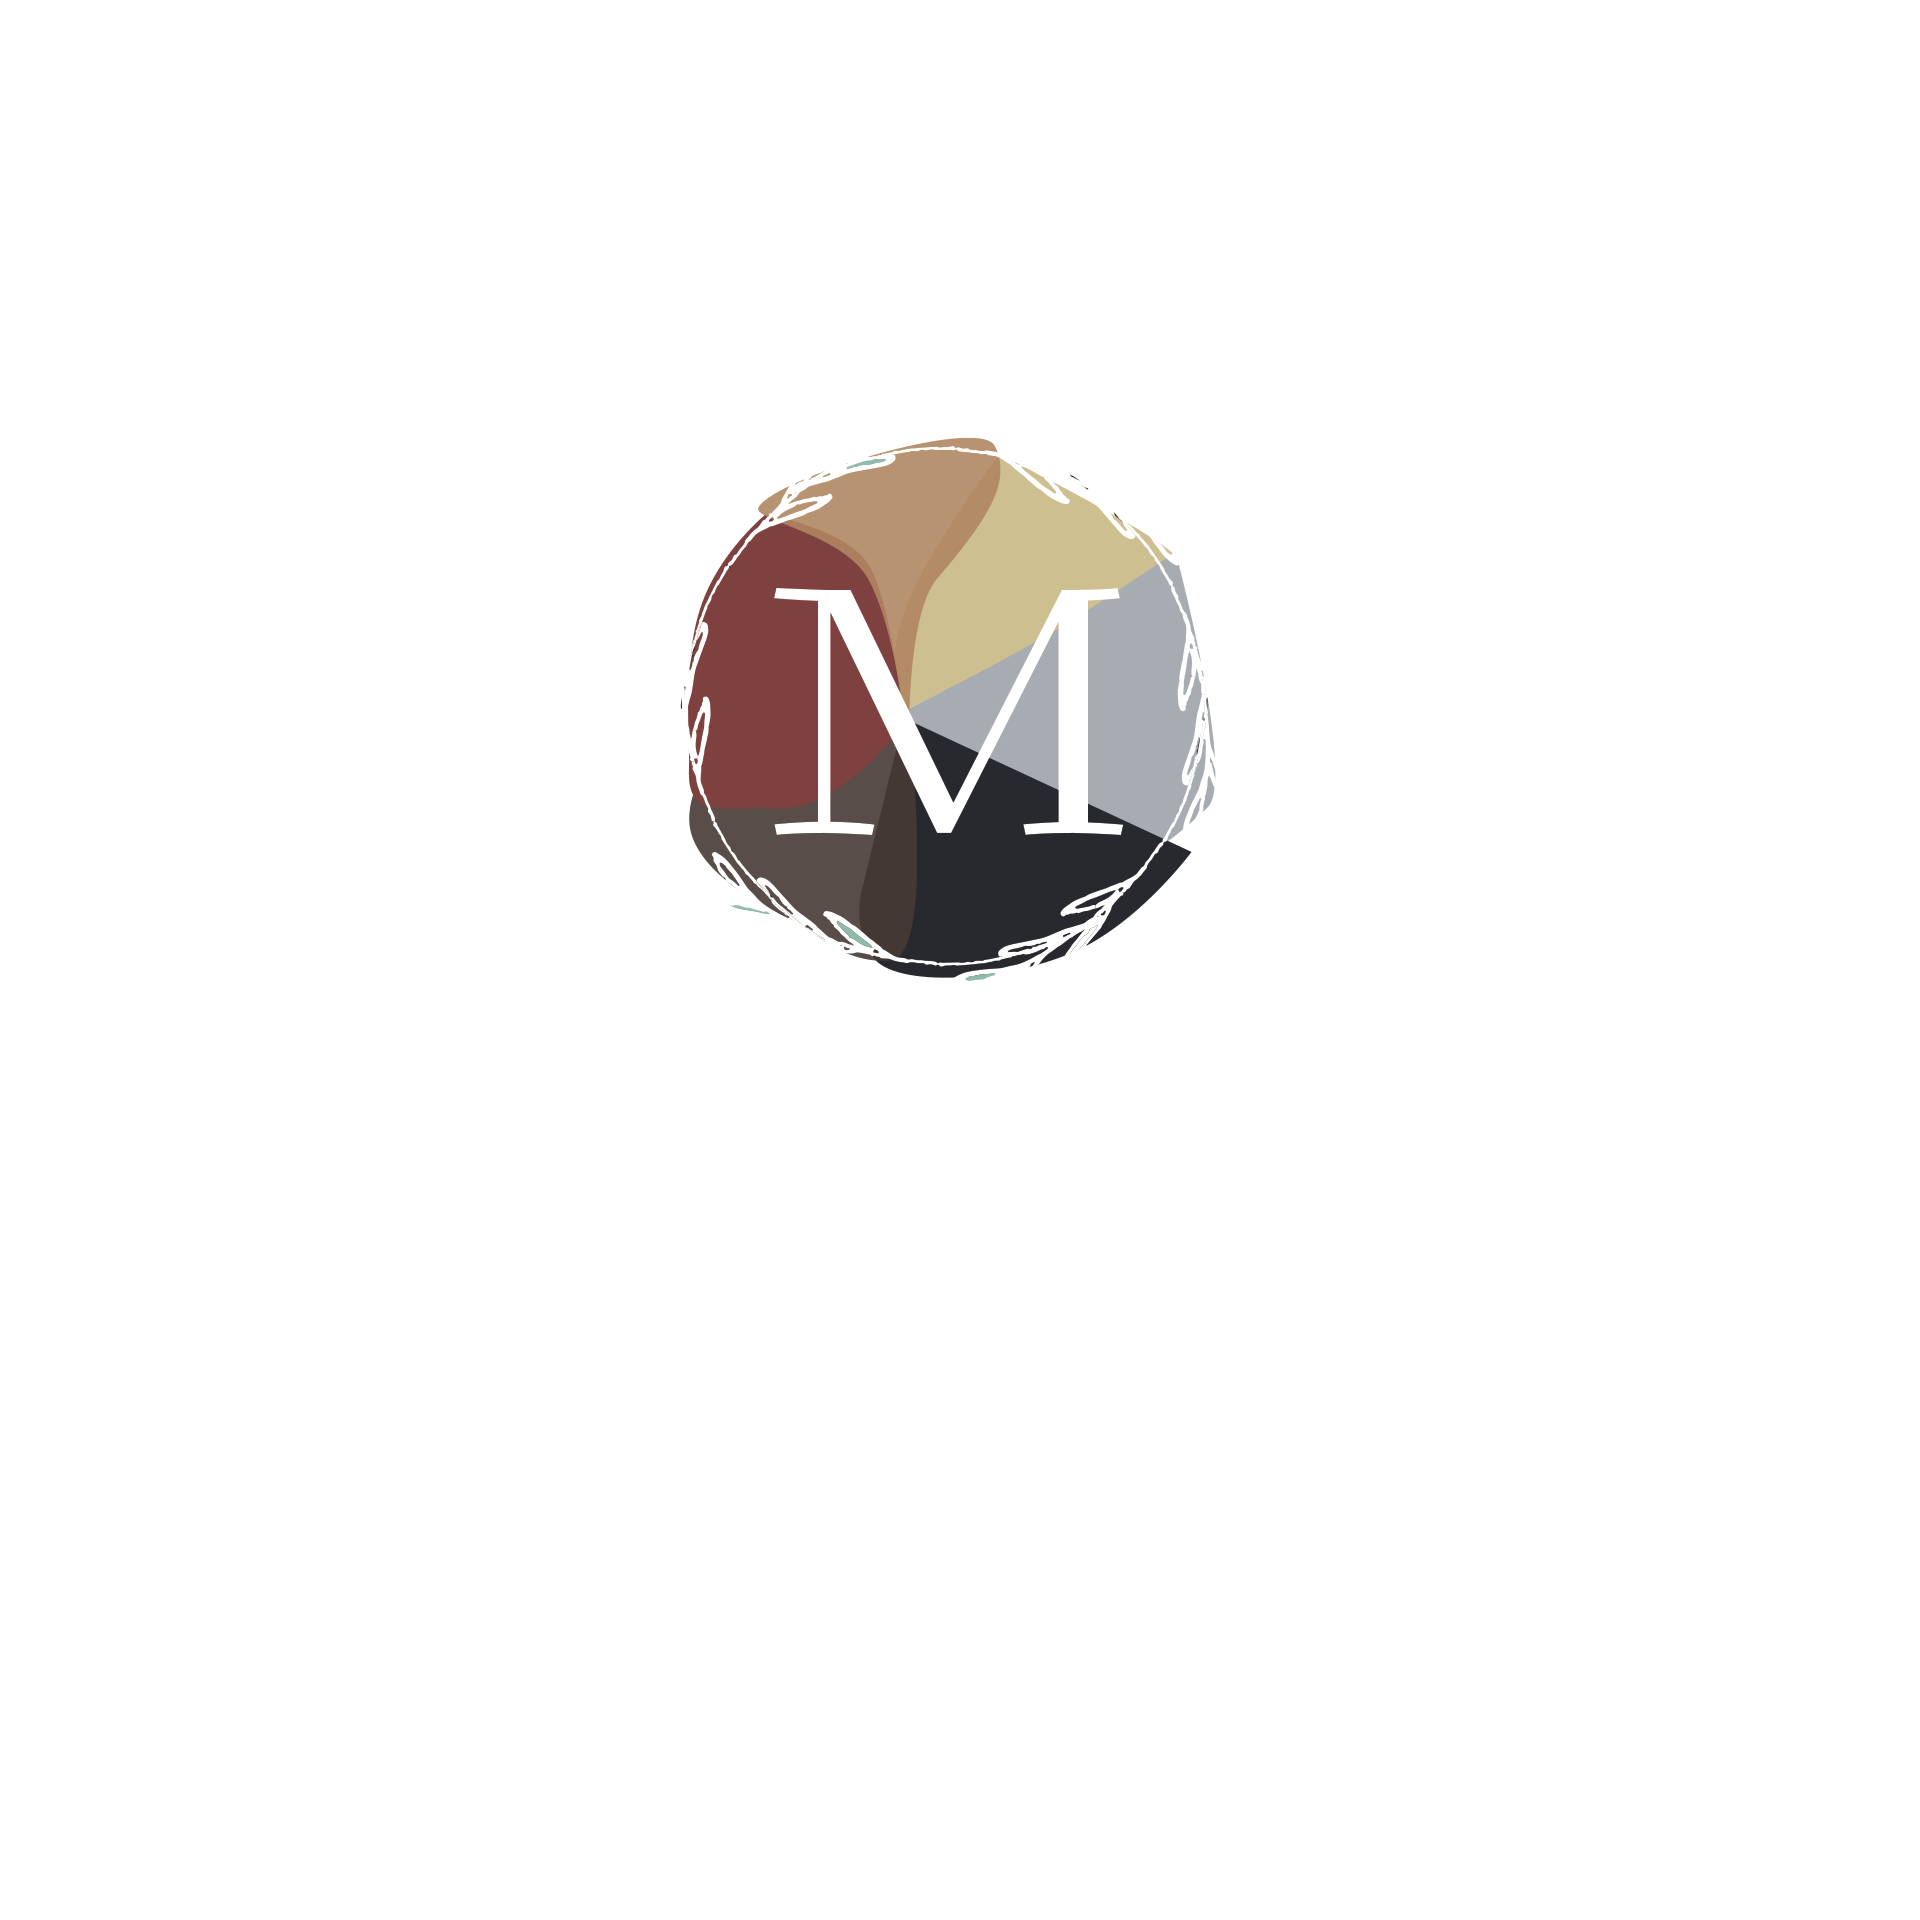 New homes for sale at Meadow Brook